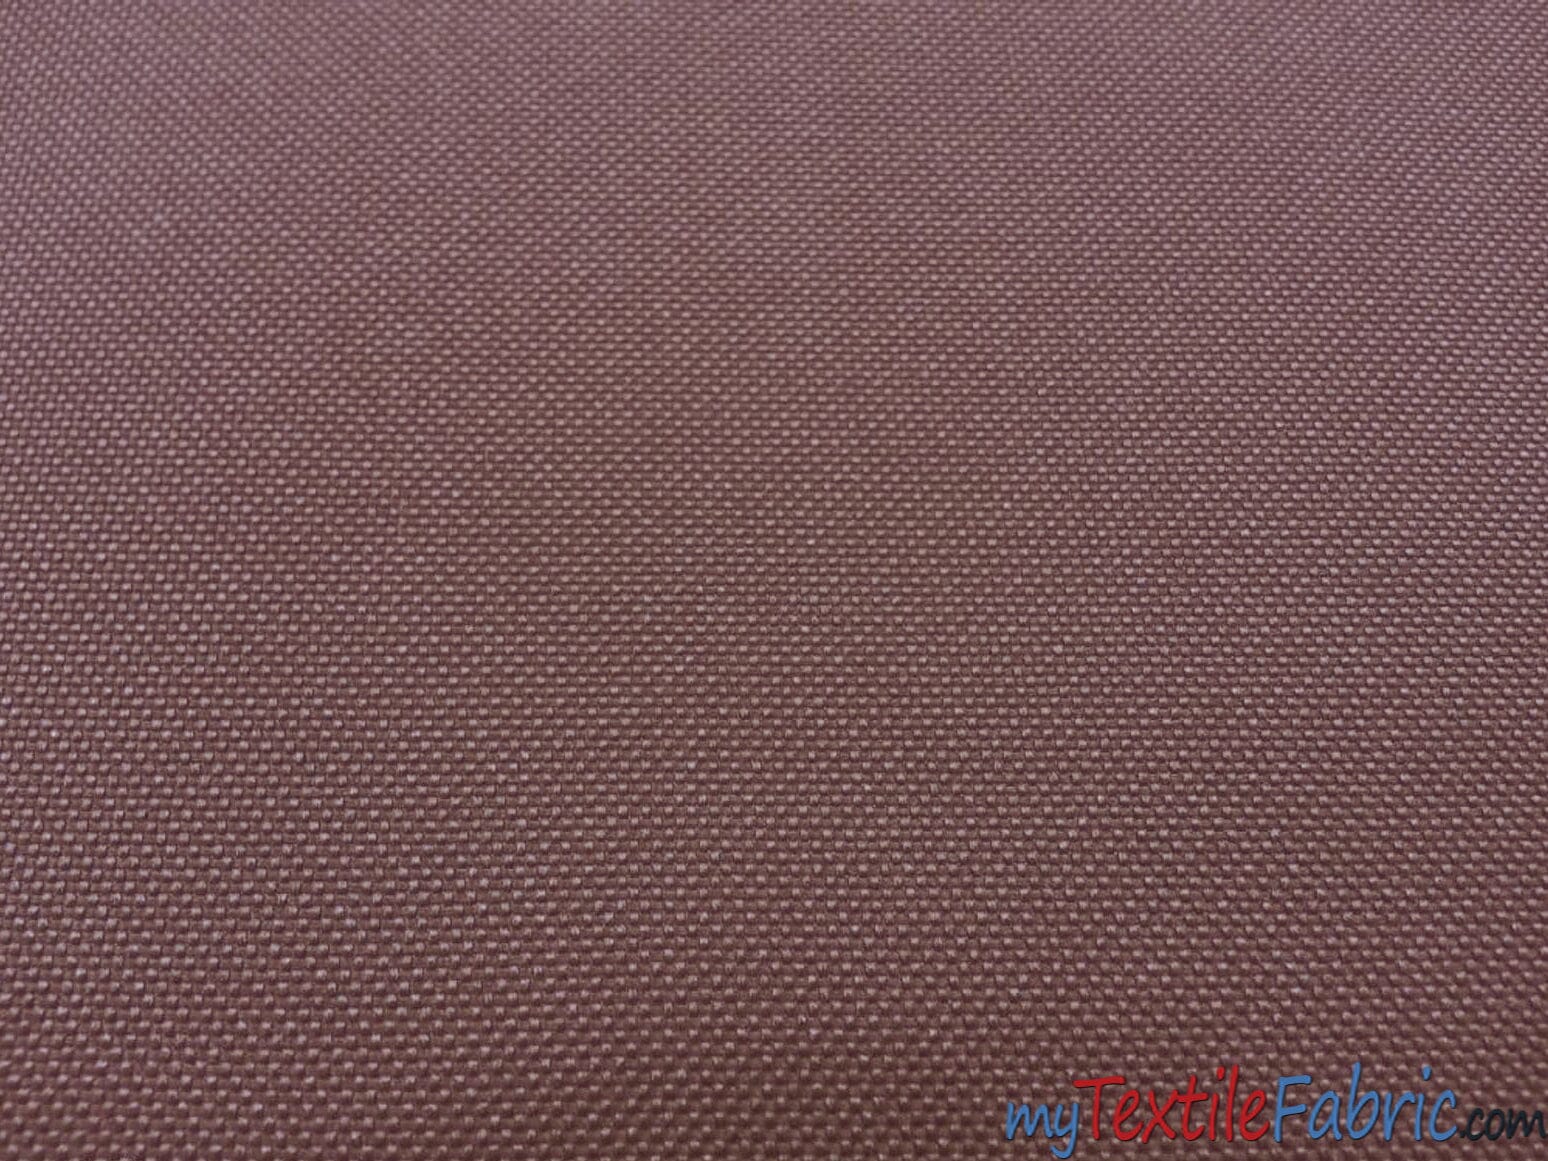 Strong, waterproof UV-resistant Polyester Fabric 260 g/m²